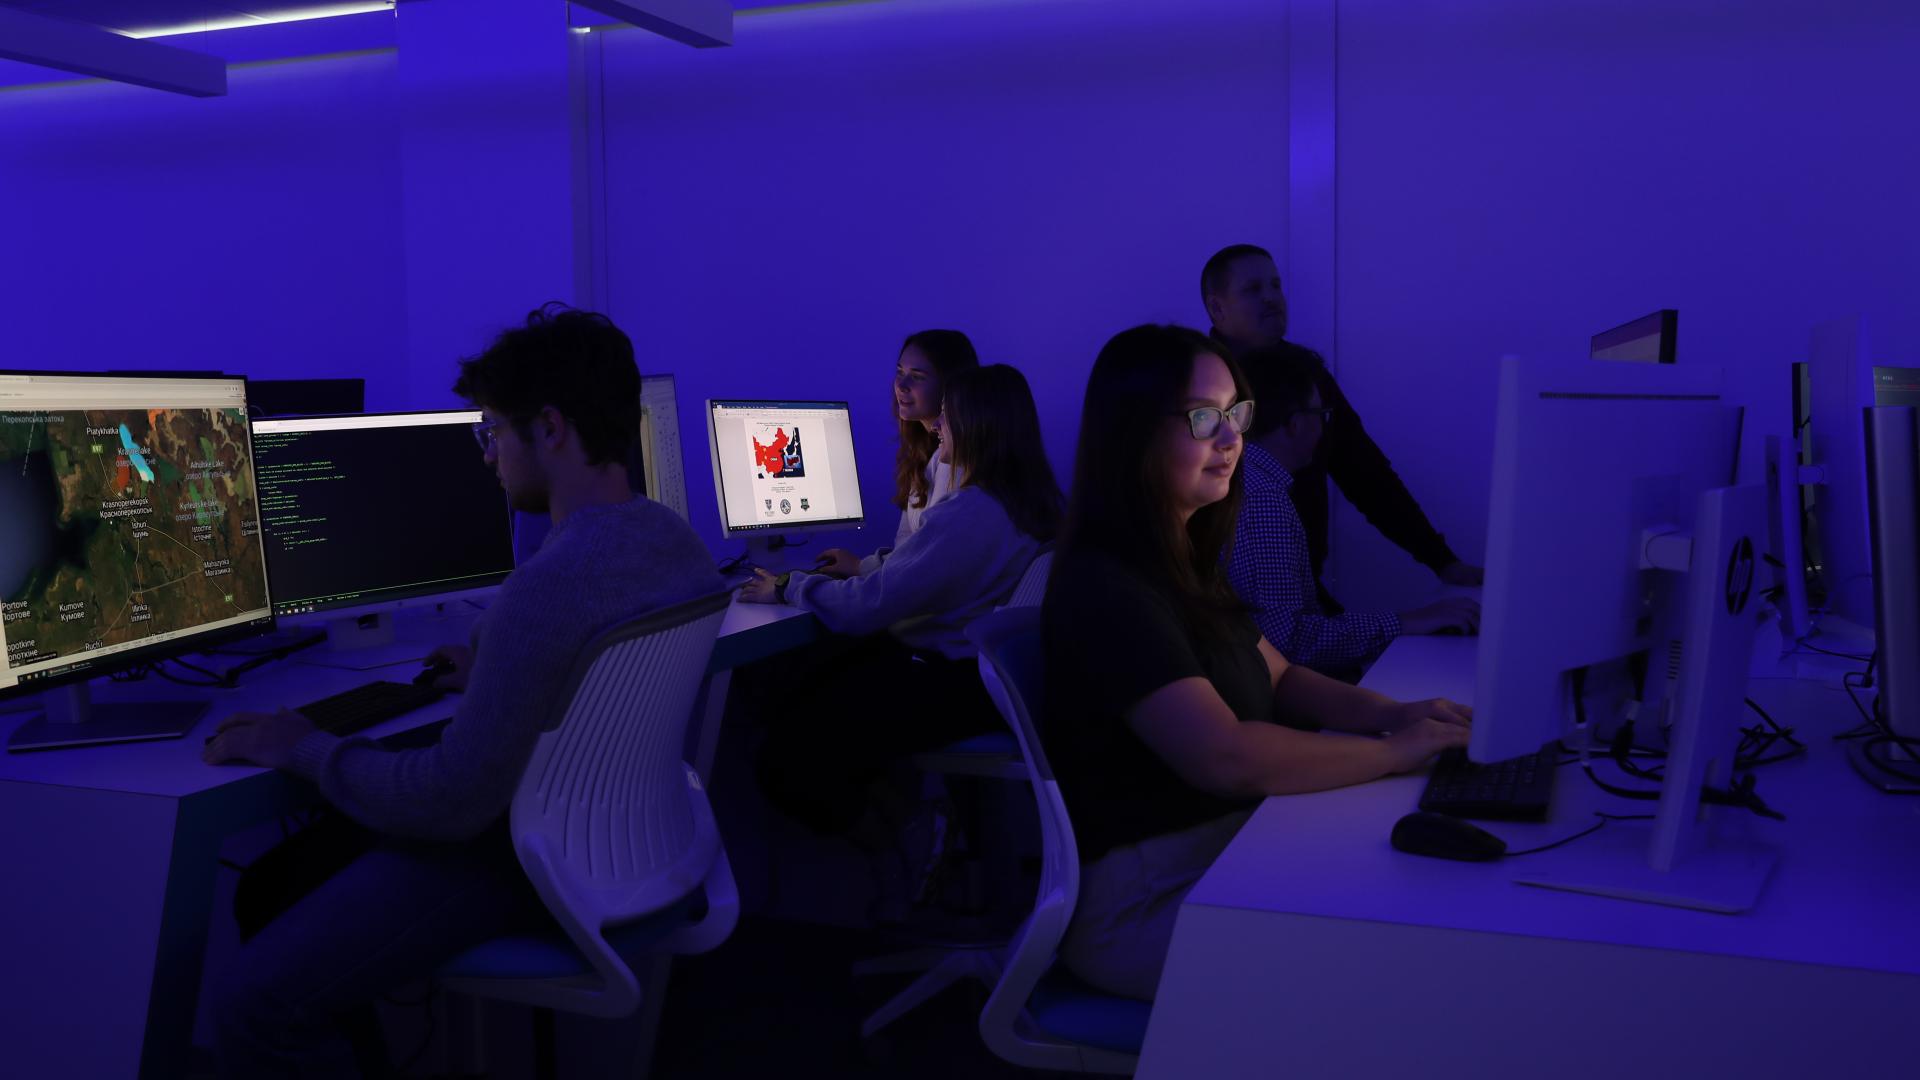 group of students in cyber lab background image